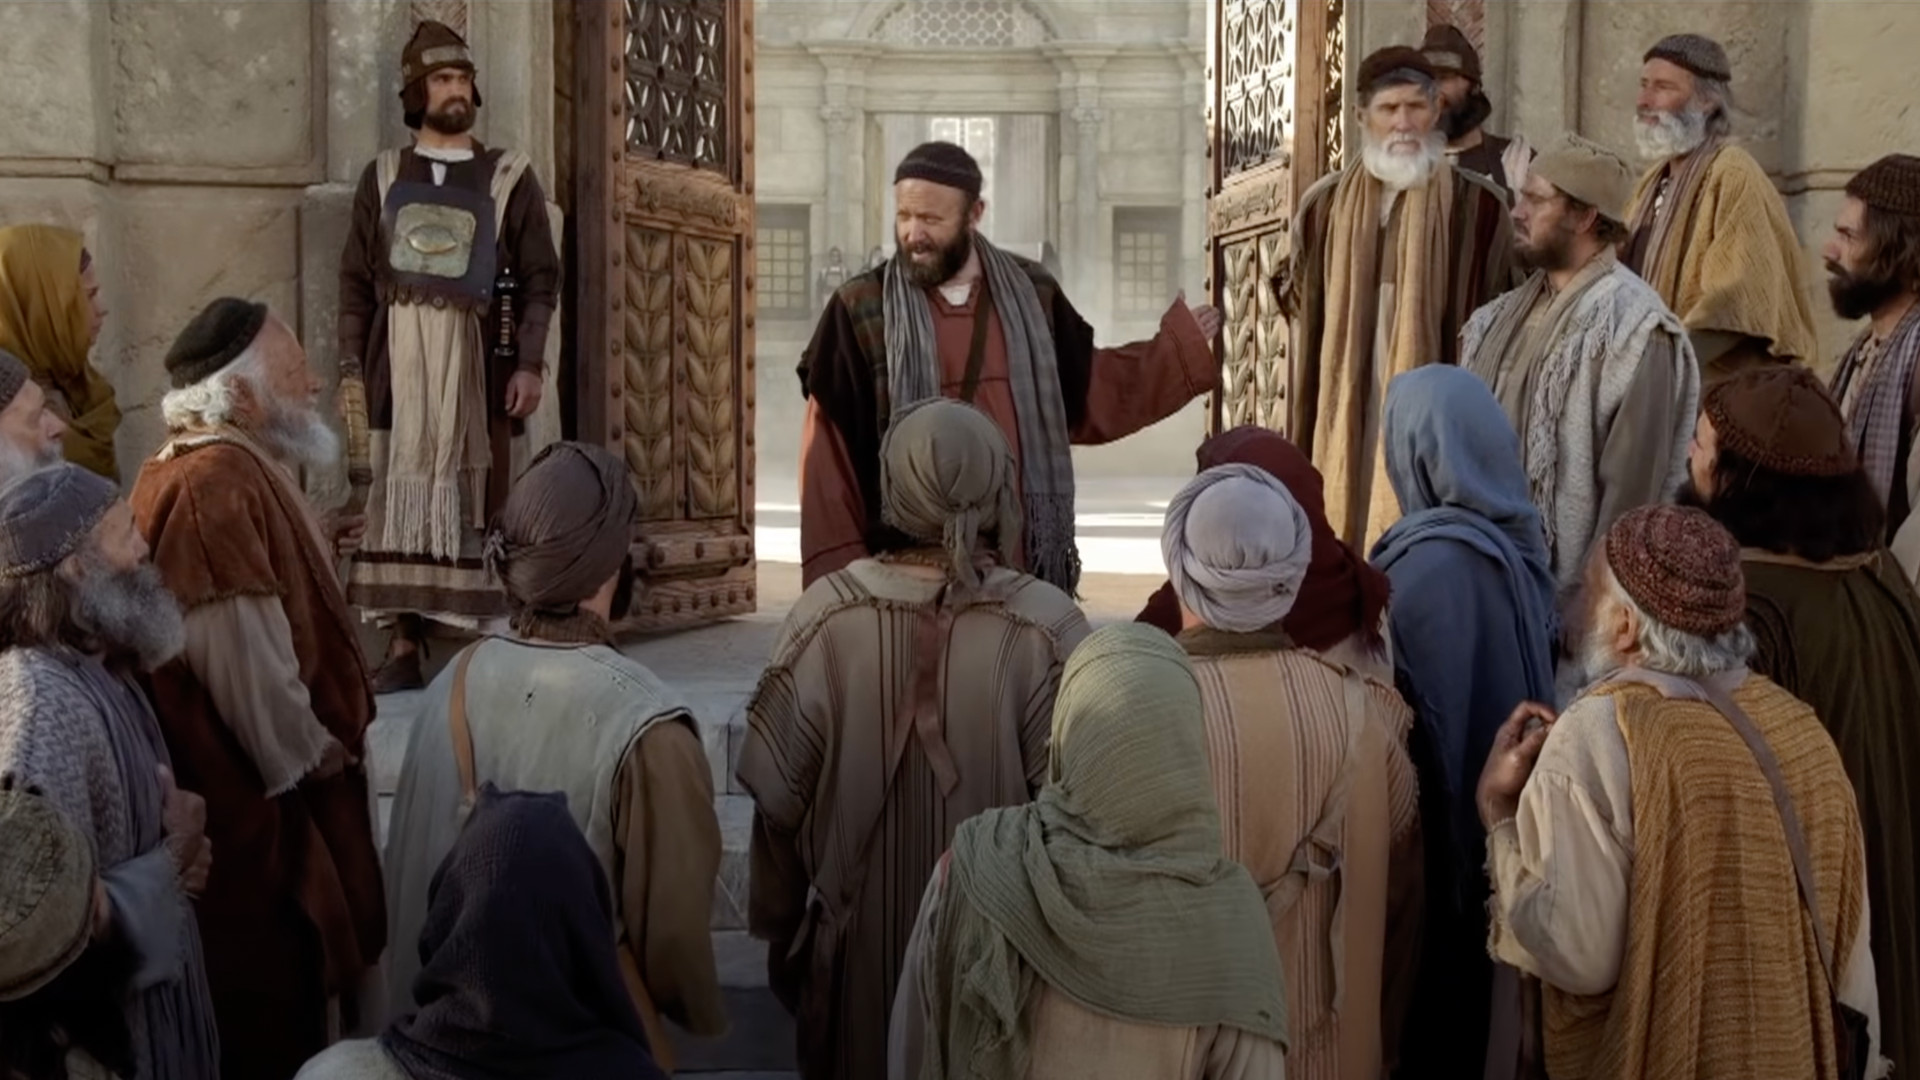 A still from the Bible video "Ye Are The Temple of God," depicting Paul teaching in front of the temple.